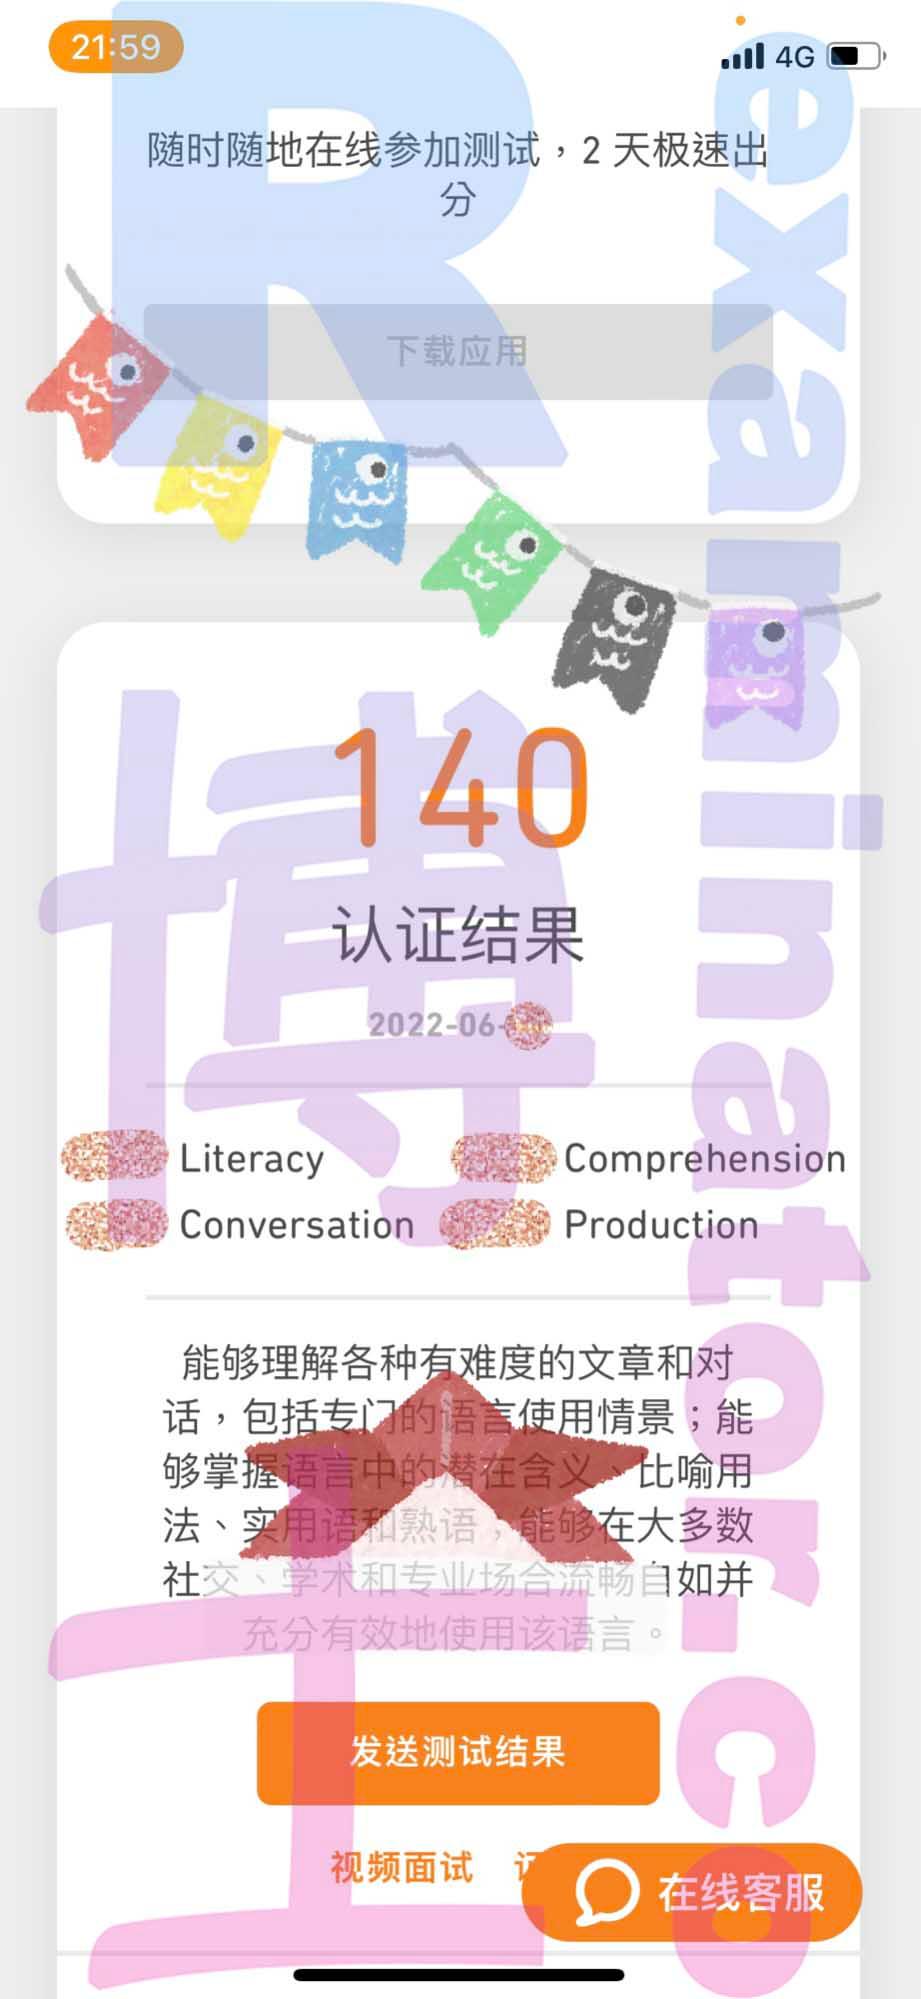 Official score of 140 on Duolingo English Test! Our client got the official score within 24 hours after taking the test😊